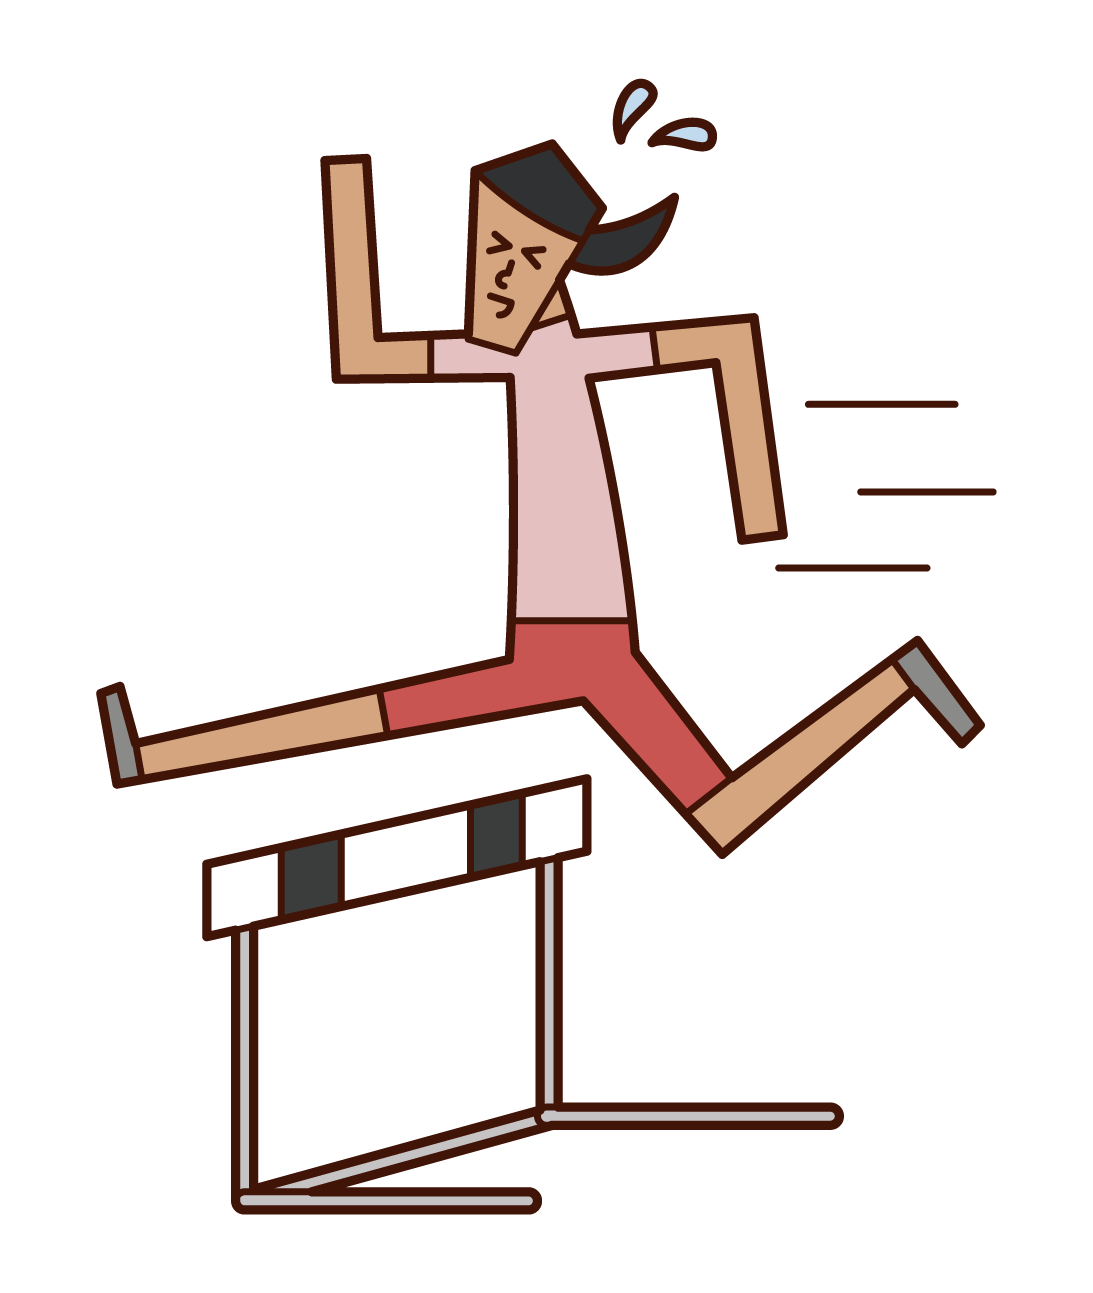 Illustration of a woman jumping over a hurdle